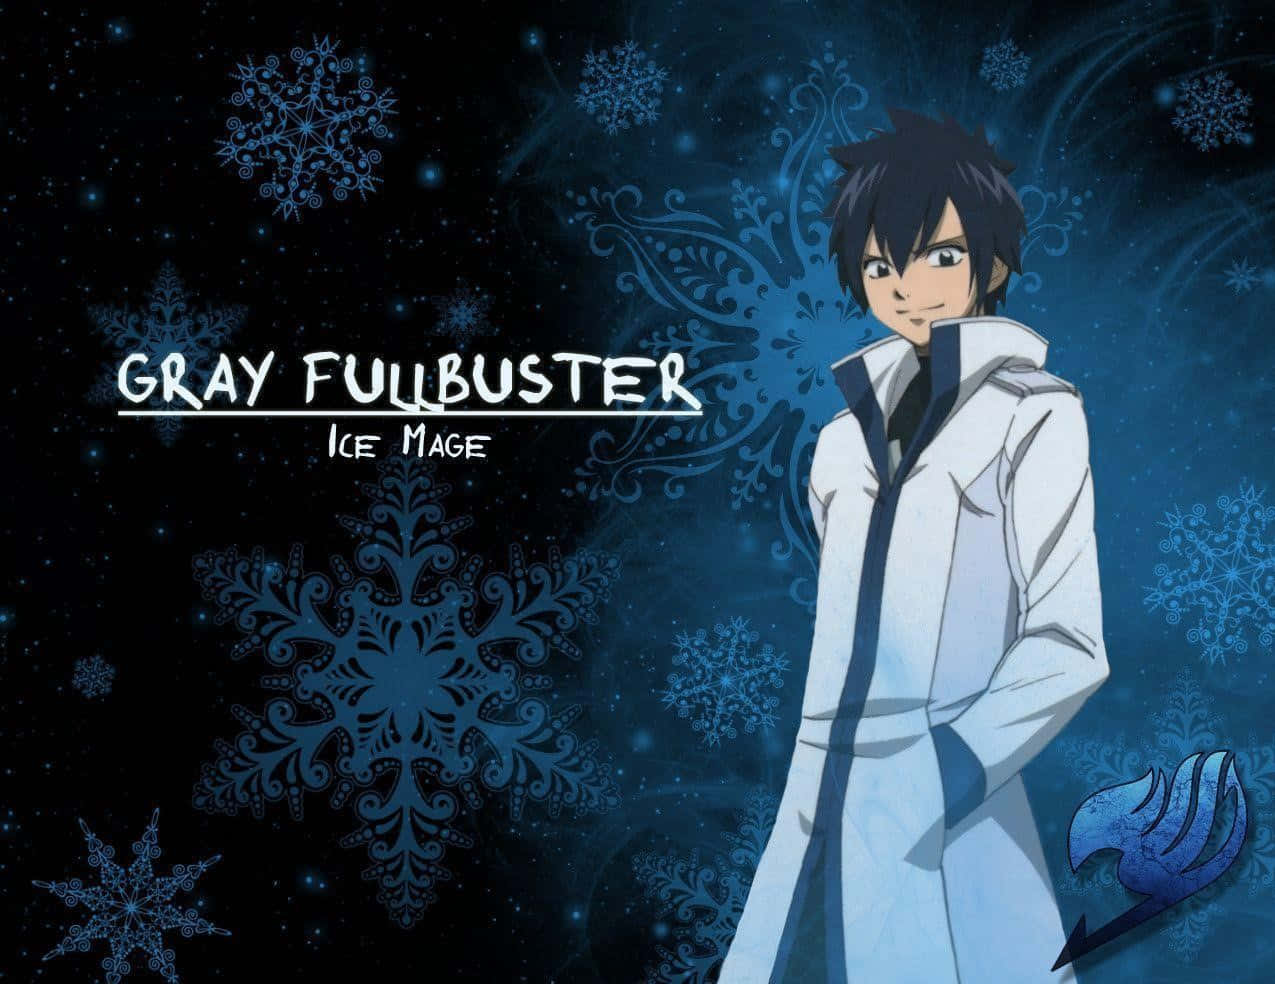 Cool and Confident - Gray Fullbuster from Fairy Tail Wallpaper